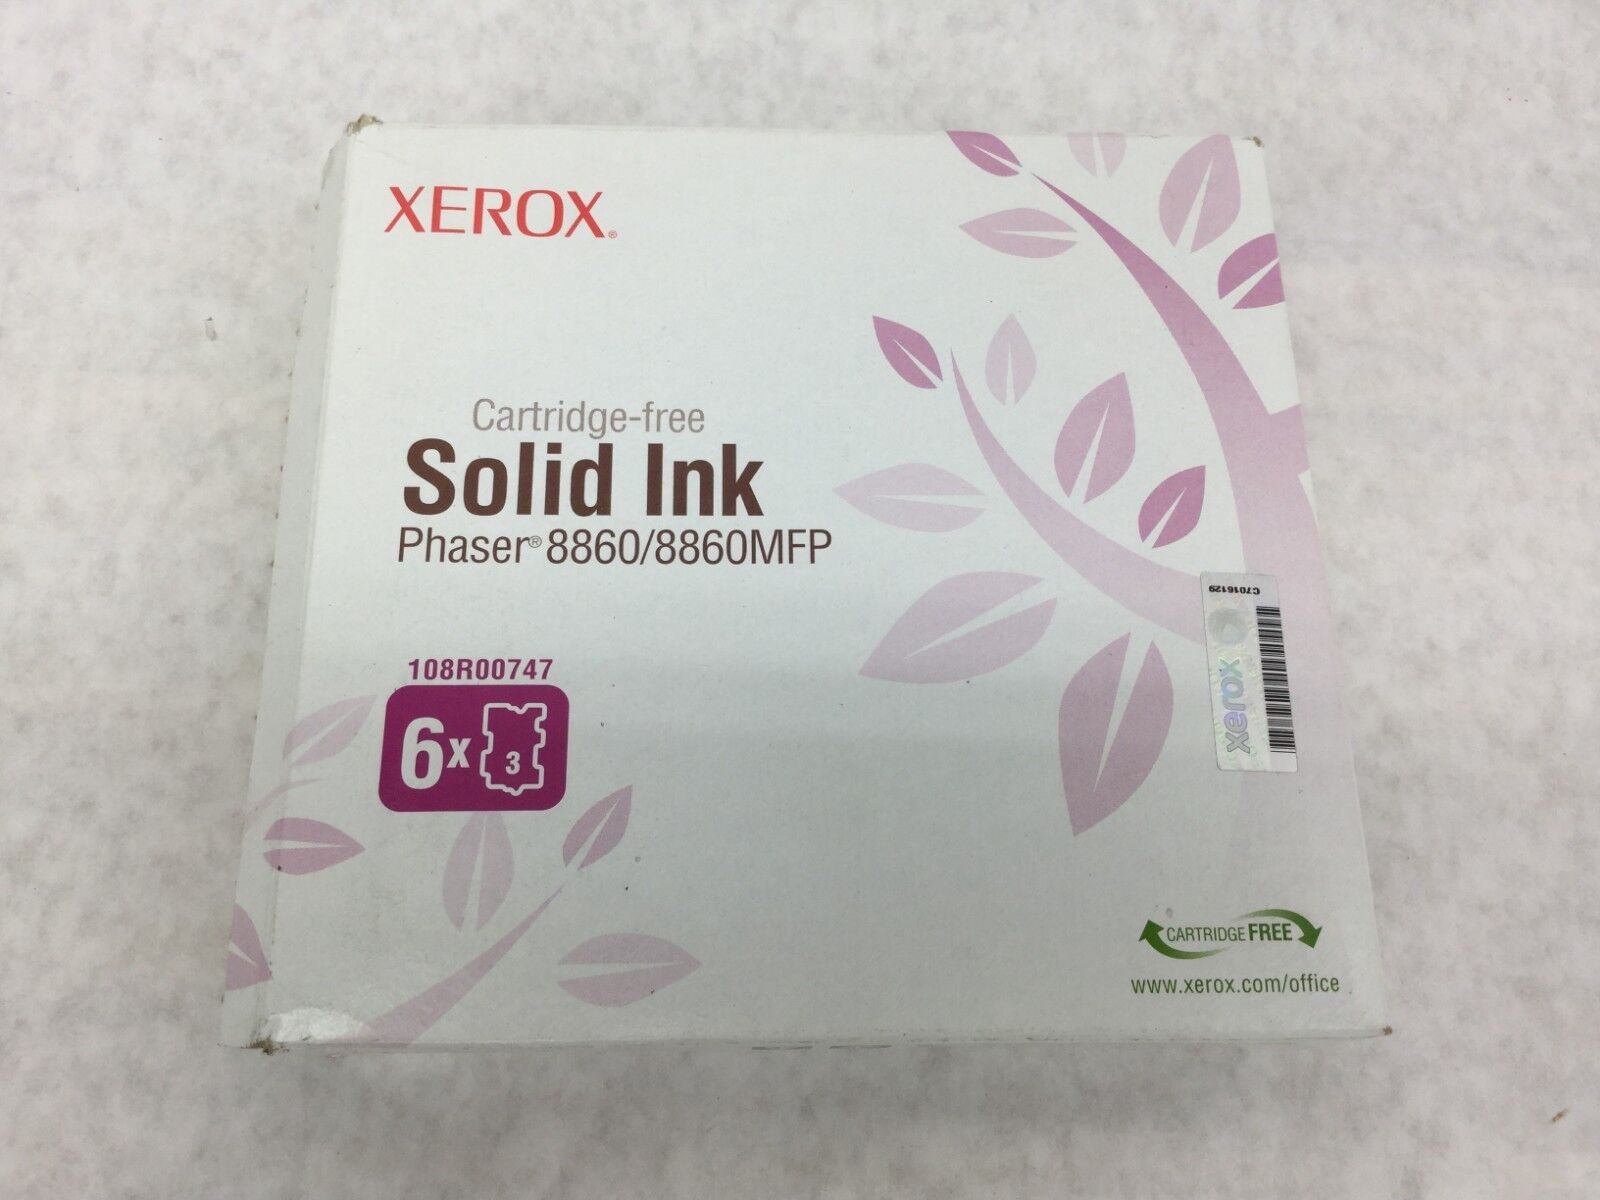 Genuine Xerox Solid Ink Magenta 108R0747 for Phaser 8860/8860MFP  4 in Pack-NEW